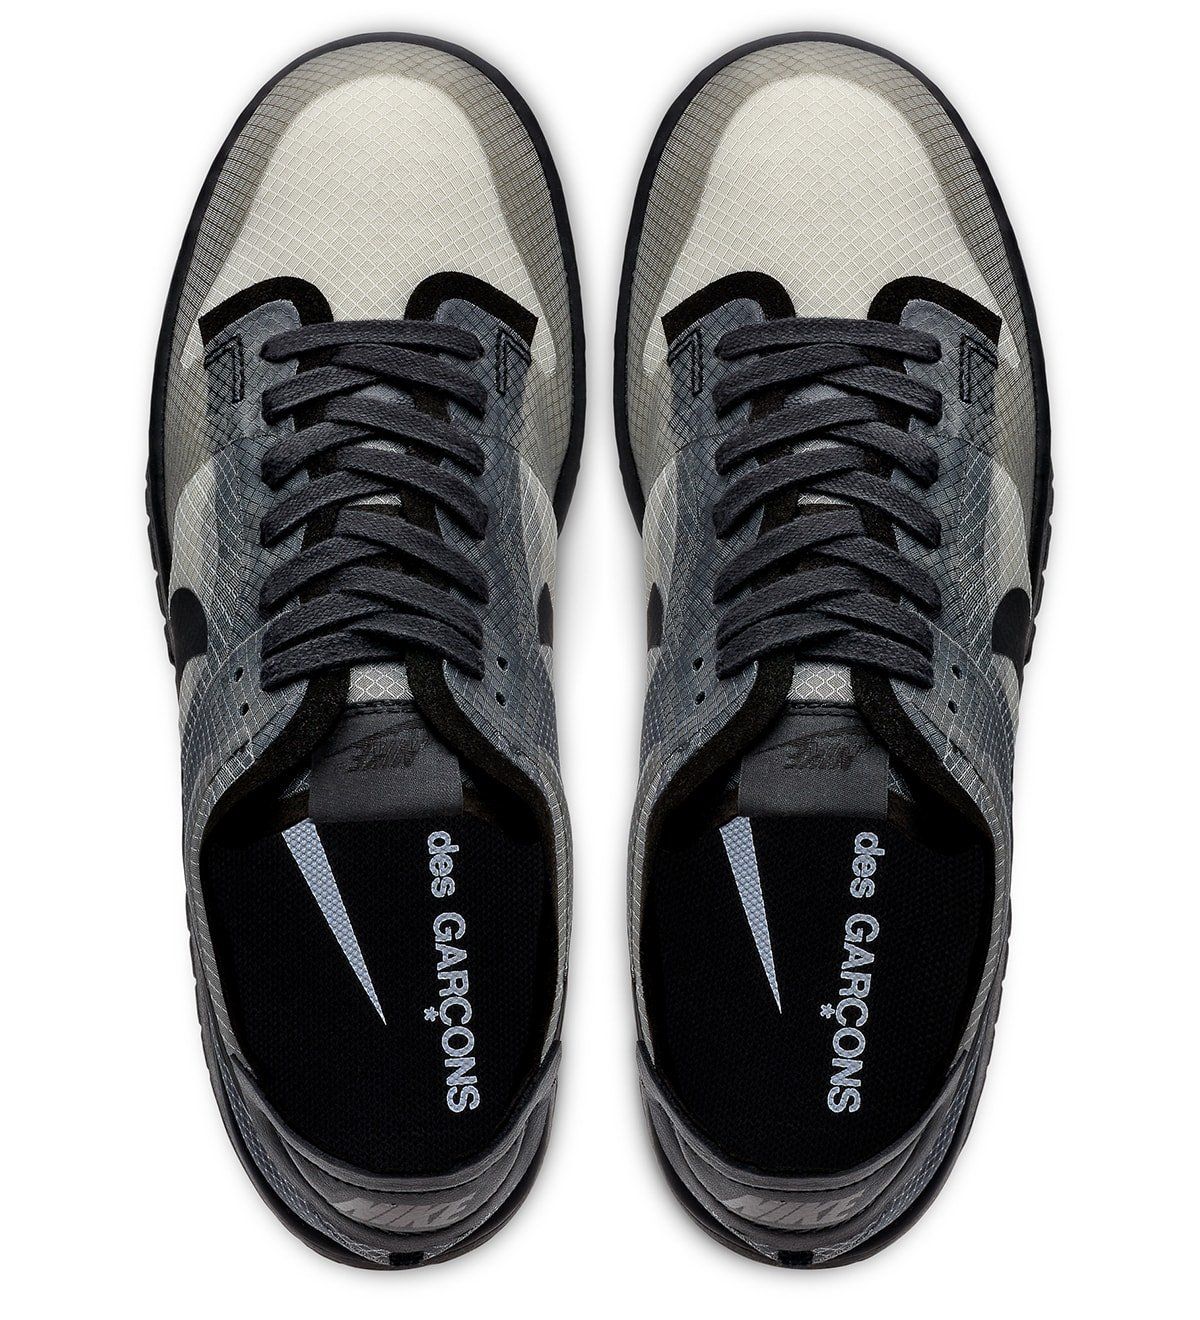 Where to Buy the Comme des Garçons x Nike Dunk Lows | HOUSE OF HEAT